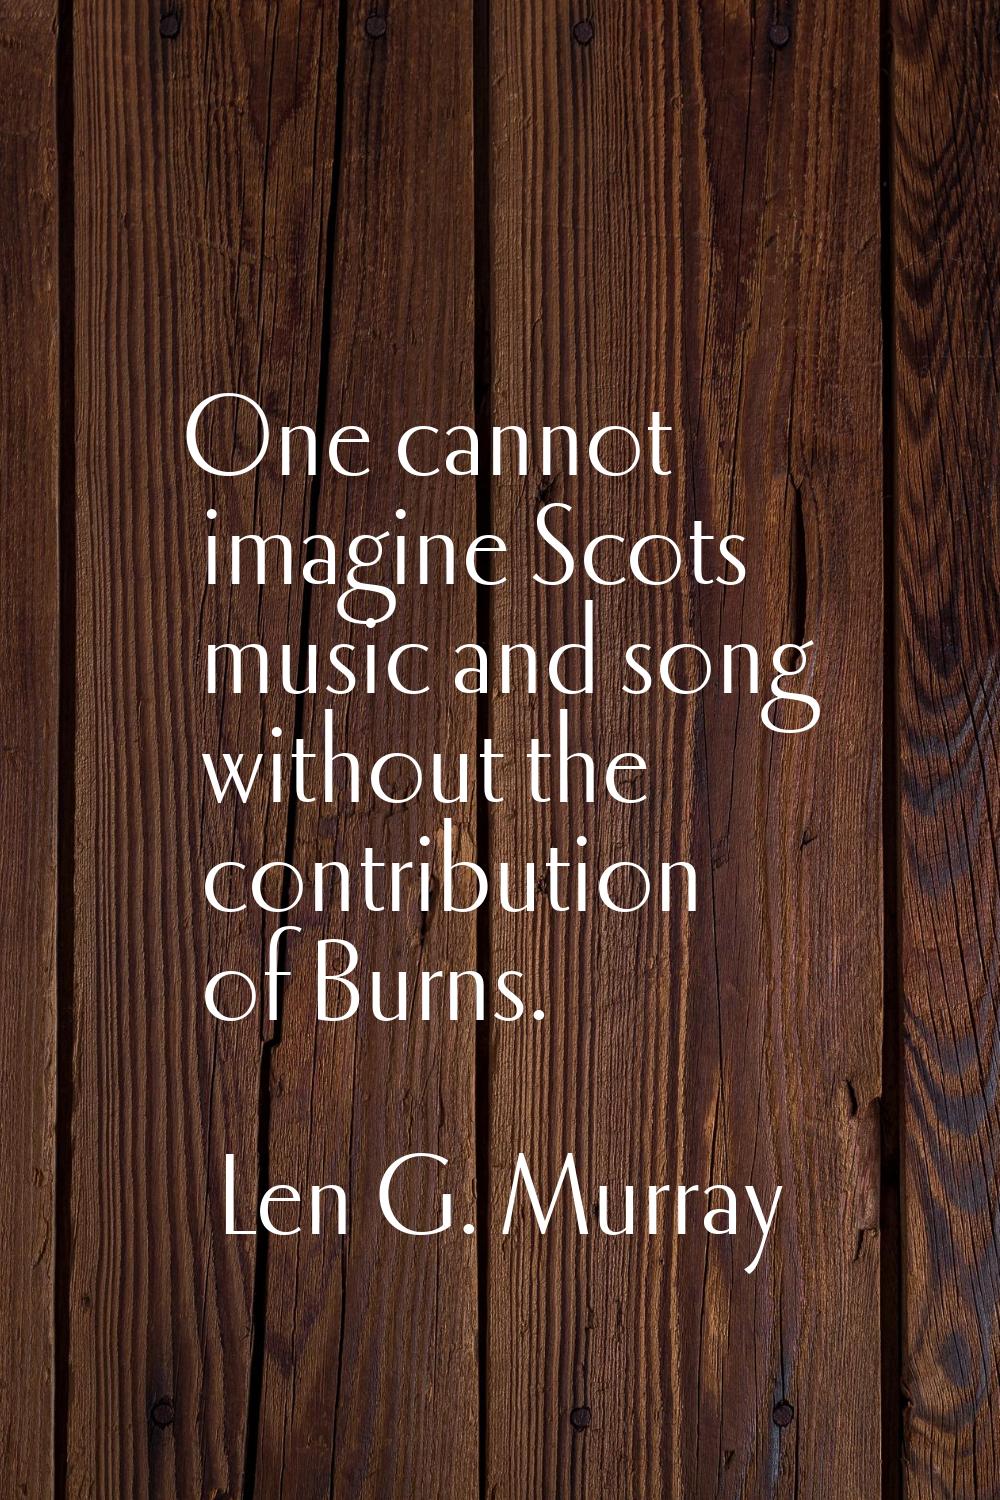 One cannot imagine Scots music and song without the contribution of Burns.